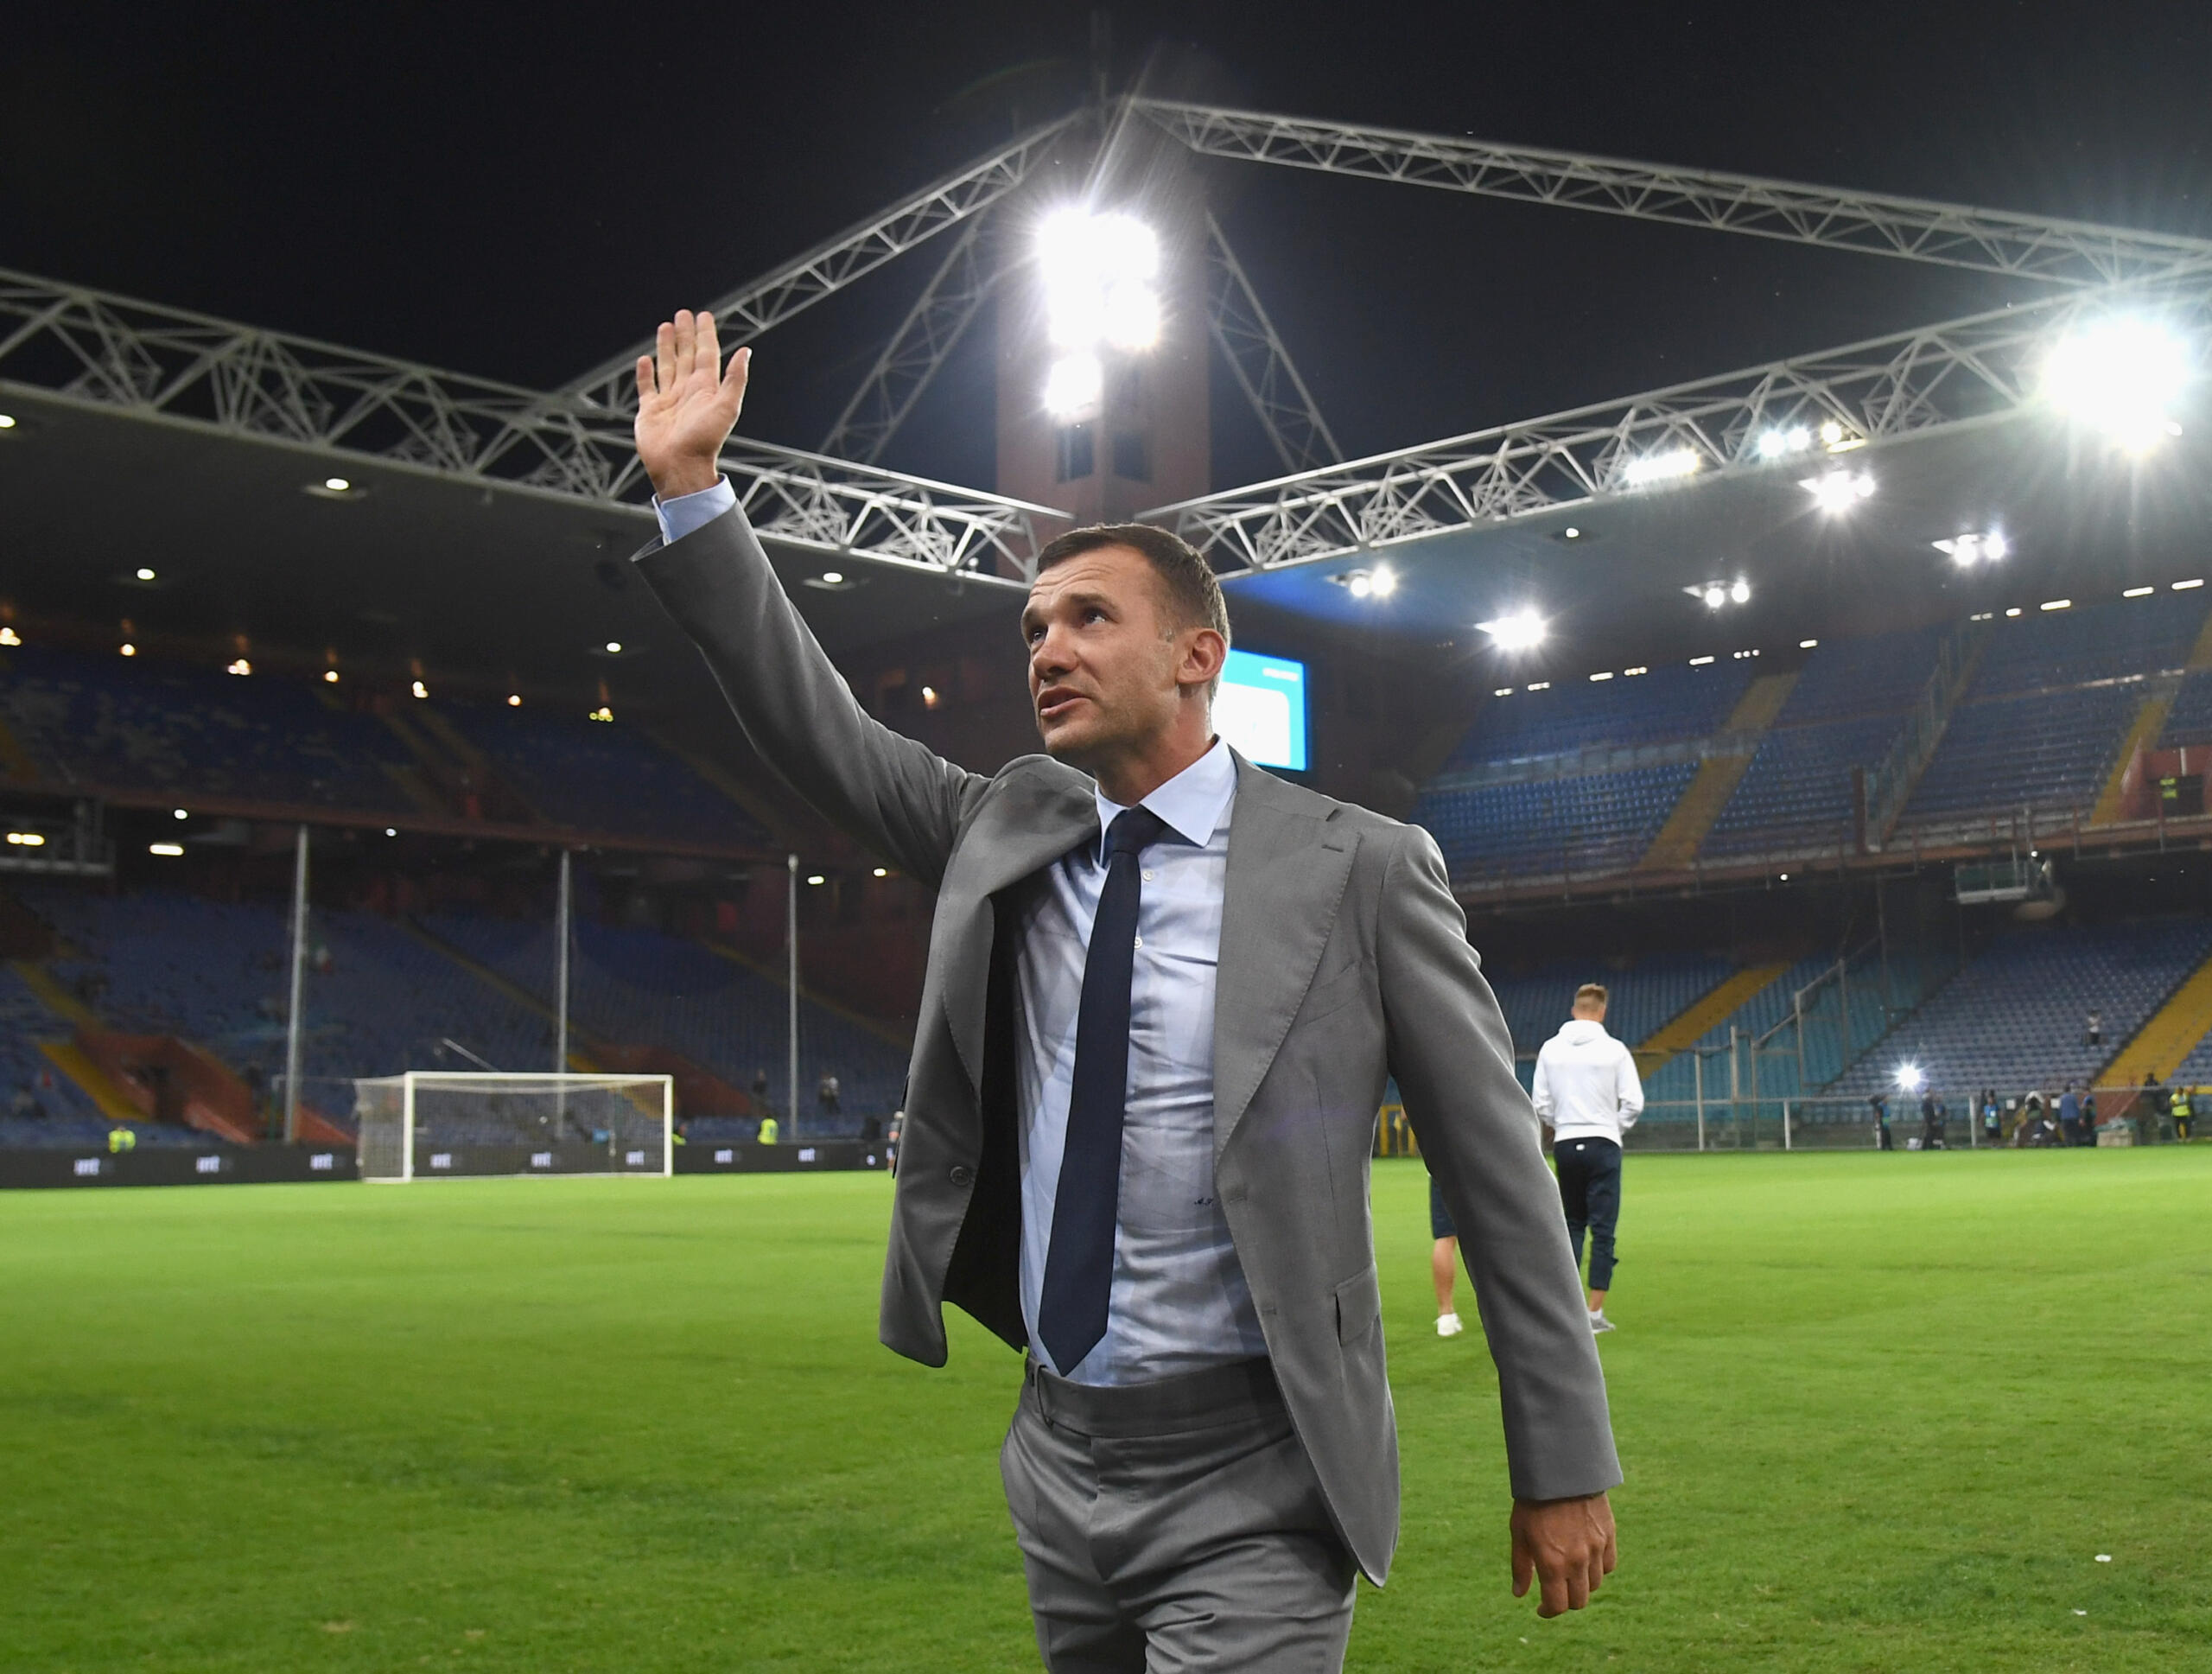 Milan legend Andriy Shevchenko was spotted in the stands during the recent clash with Tottenham and commented on the game and more in an interview.